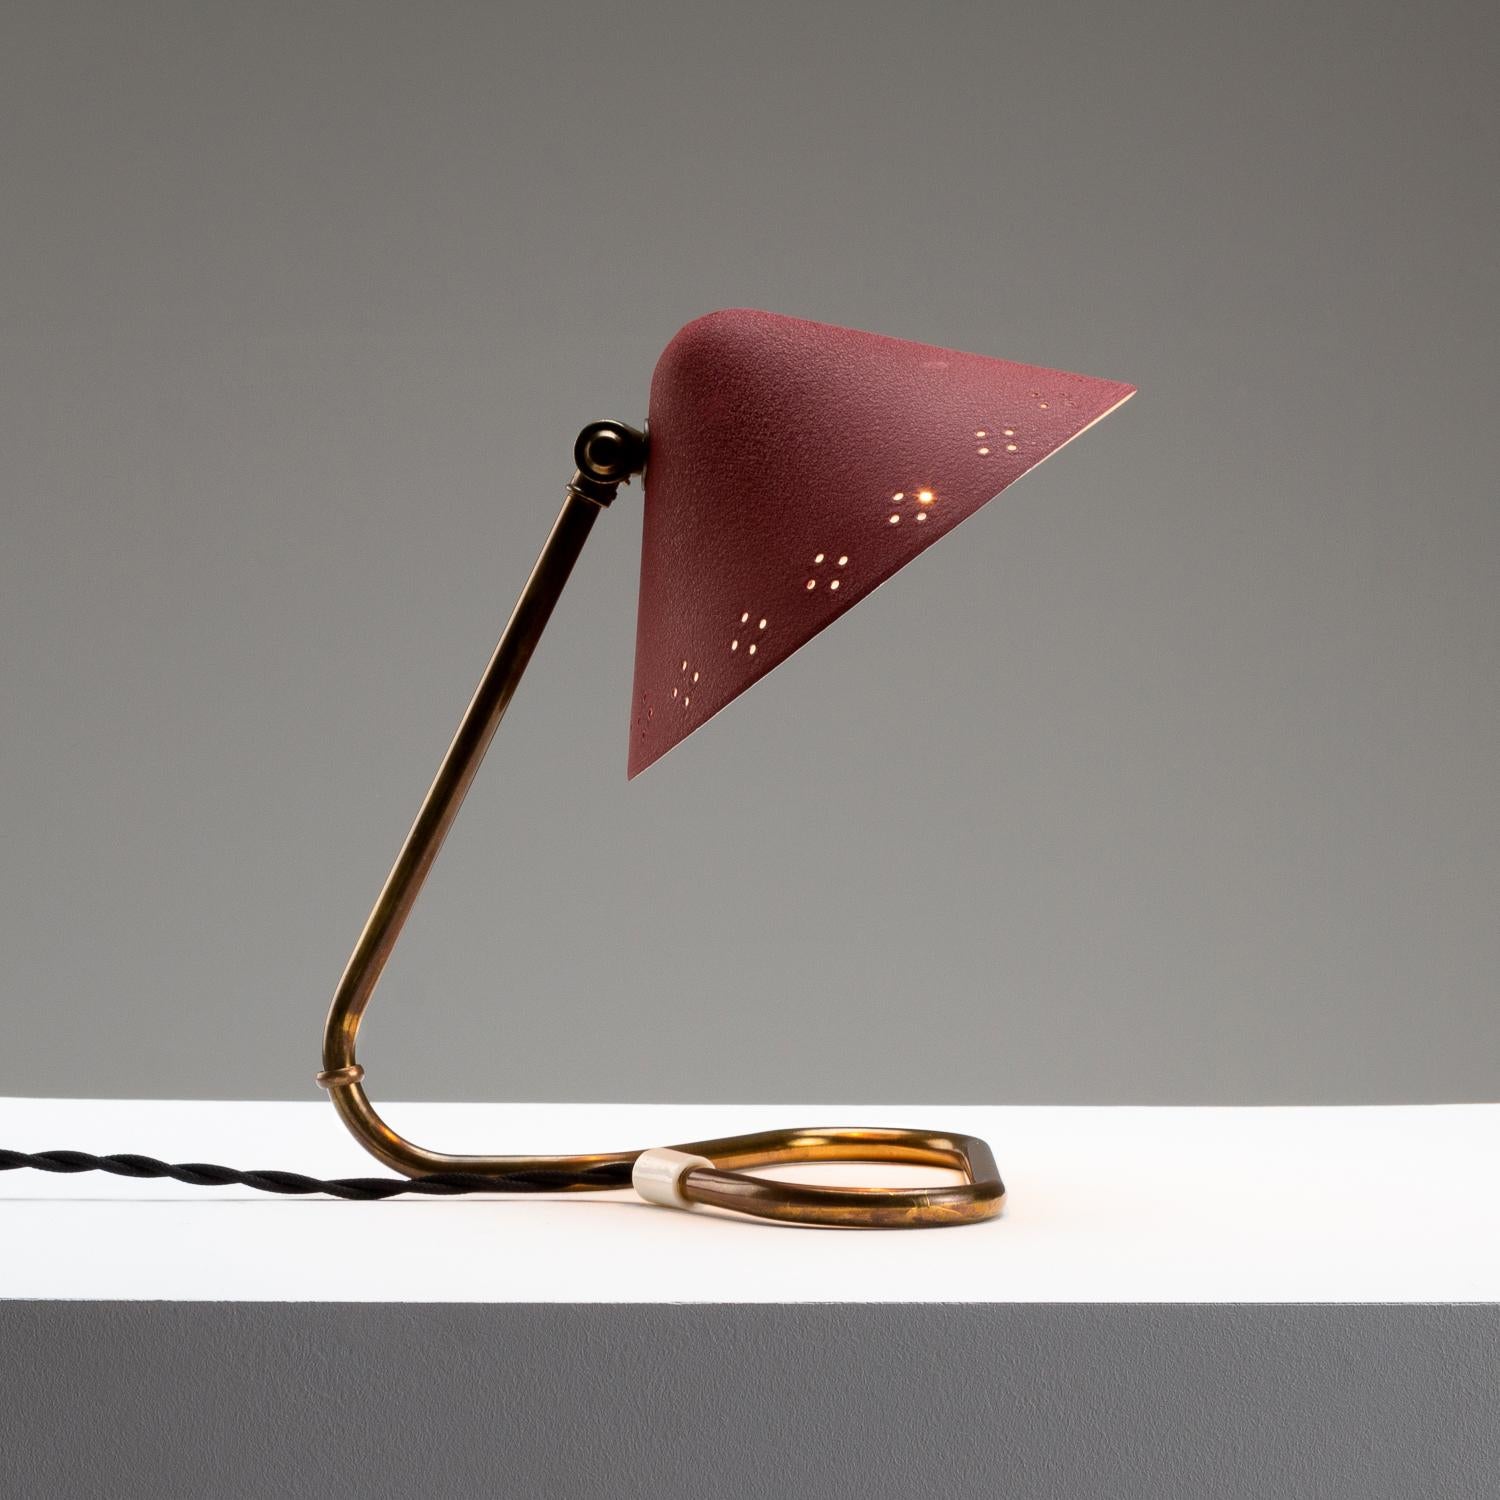 Red lacquered aluminium and brass GK14 table Lamp by Gnosjö Konstsmide, Sweden, 1950s. Patina and minor scratches. Rewired and PAT tested.

